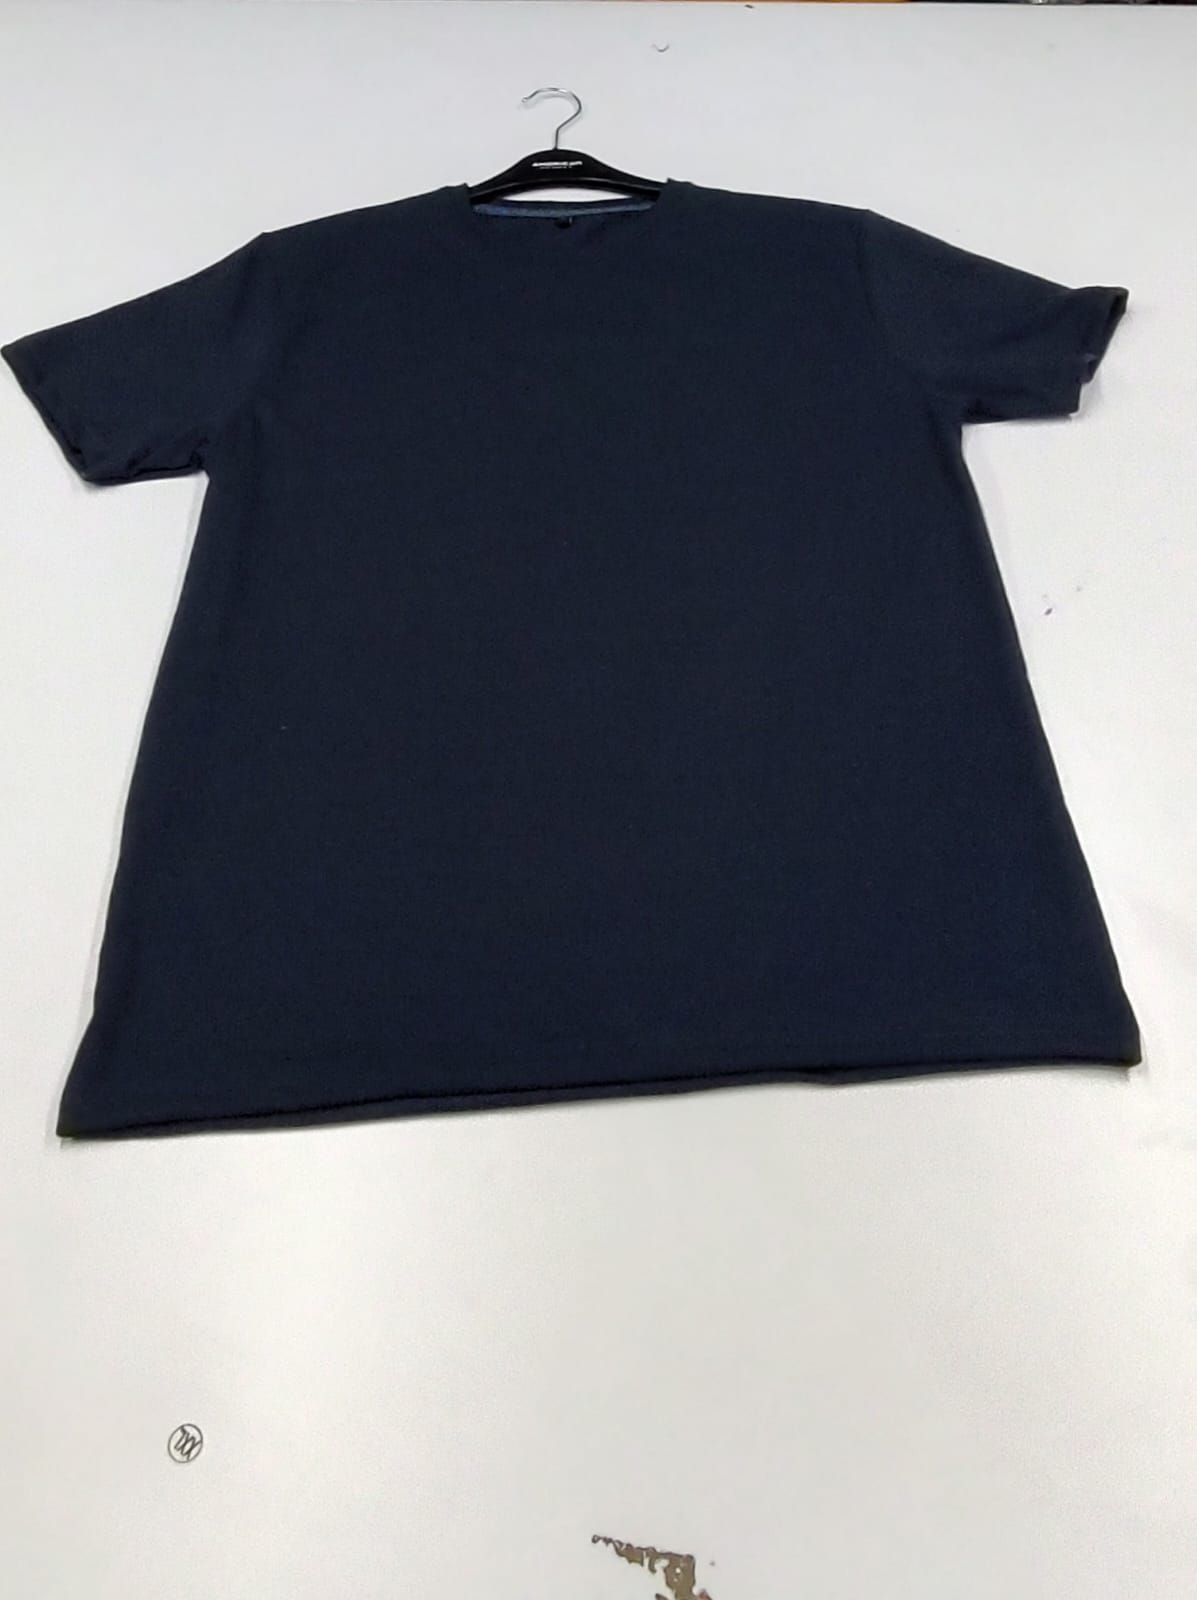 Boys T Shirts High Quality Best Wholesale Prices Made in India